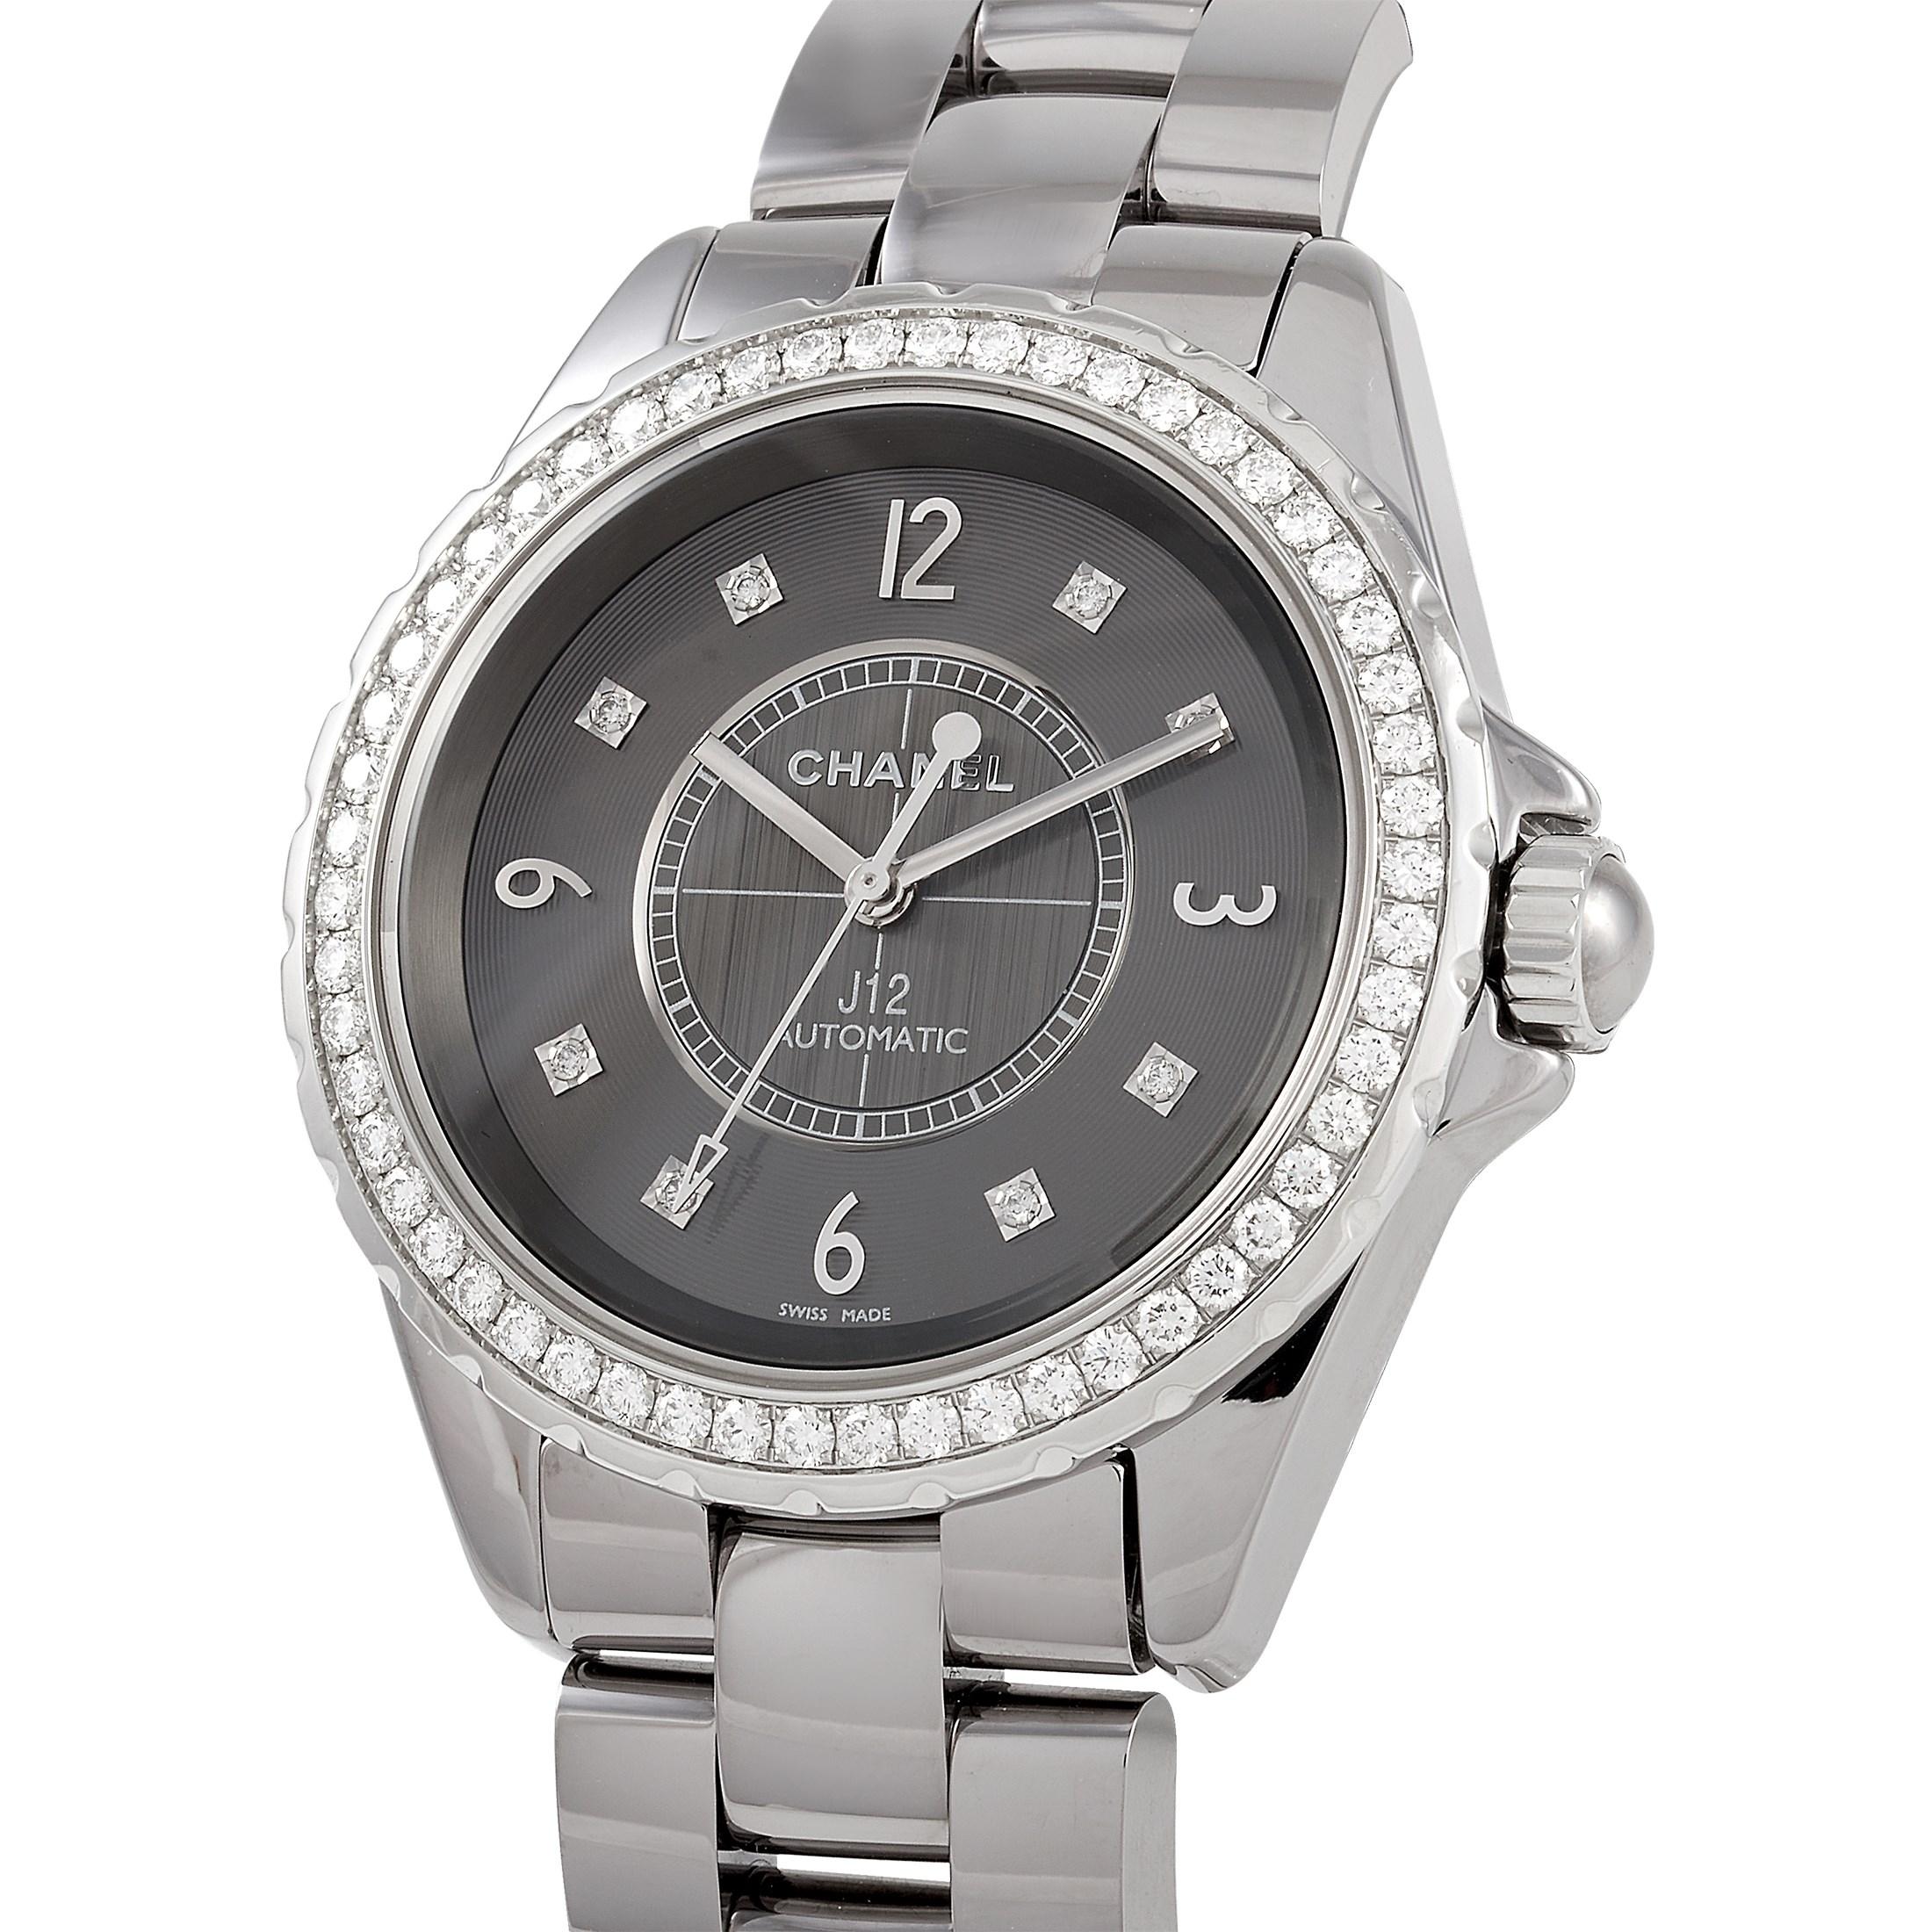 The Chanel J12 Chromatic Watch, reference number H2566, features the type of elegance you would expect from the famous luxury fashion house. Accented by glittering diamonds totaling 0.96 carats, it’s chic, sophisticated, and impeccably crafted.